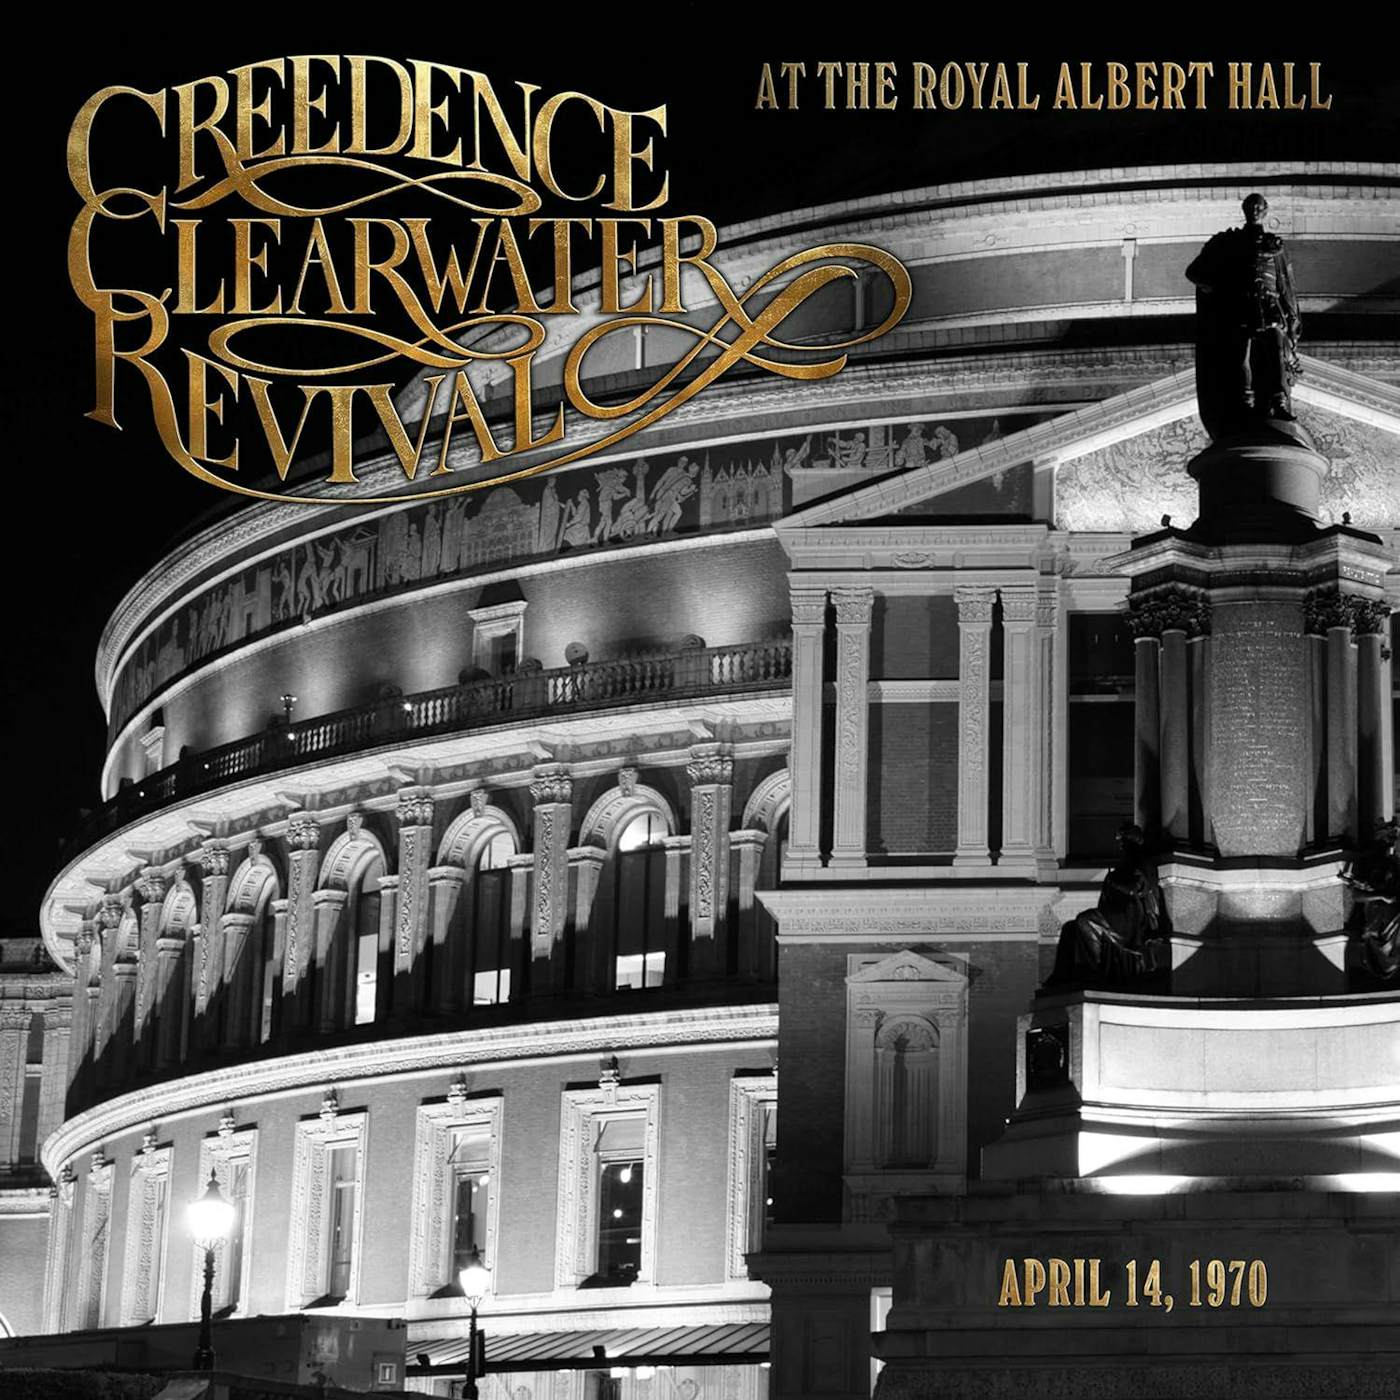 Creedence Clearwater Revival At The Royal Albert Hall (Deluxe) (2CD/2LP/Blu-ray) Vinyl Record